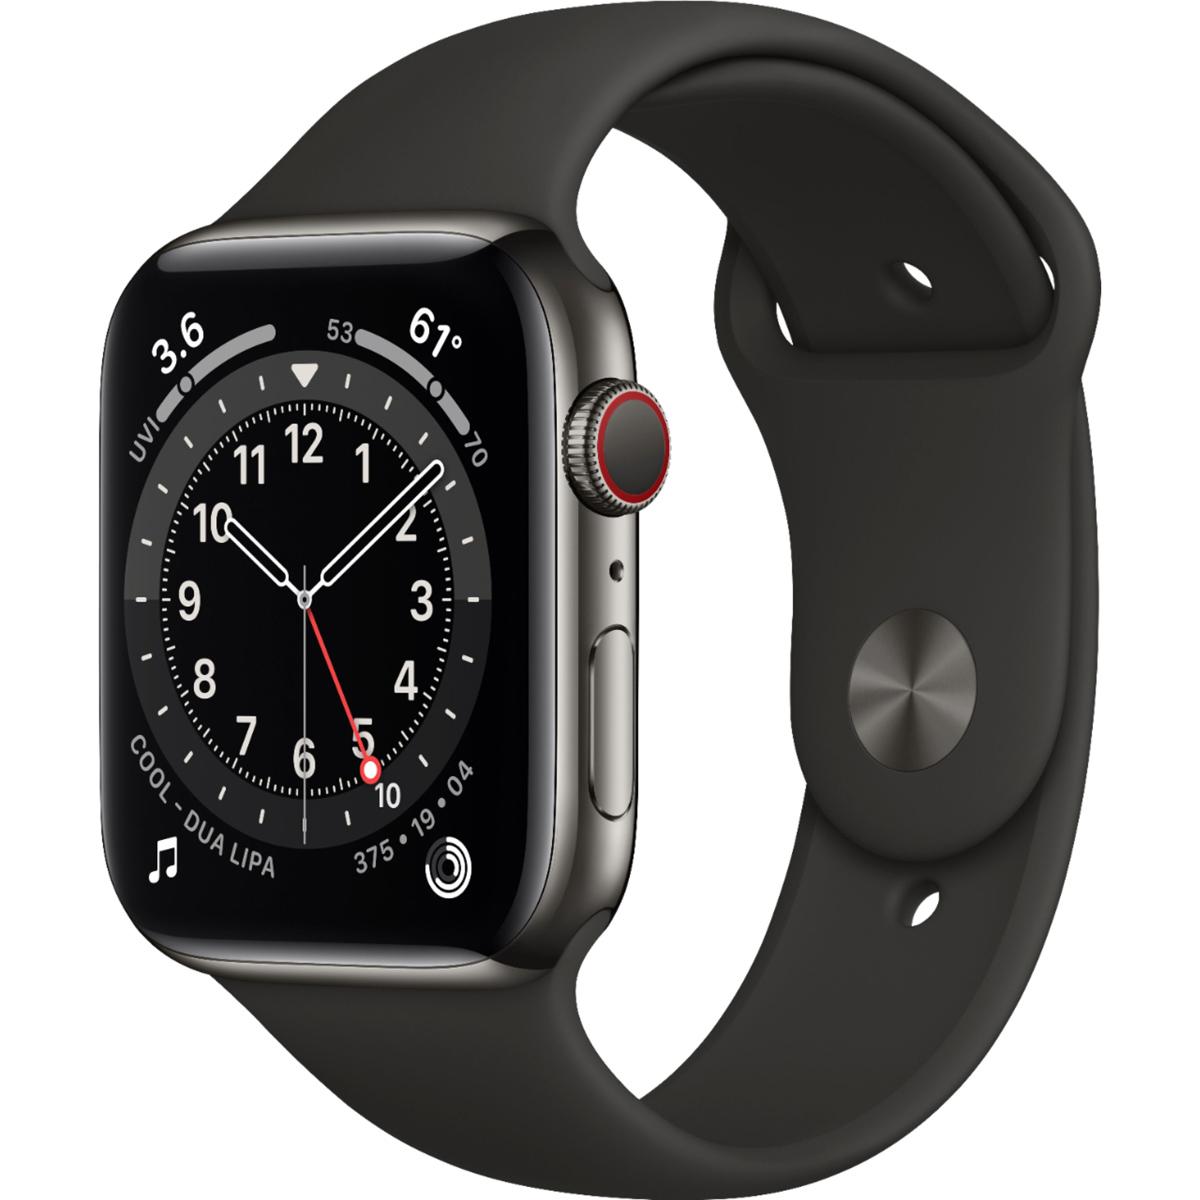 Apple Watch Series 6 Stainless Steel Cellular 44mm Smartwatch for $585.93 Shipped